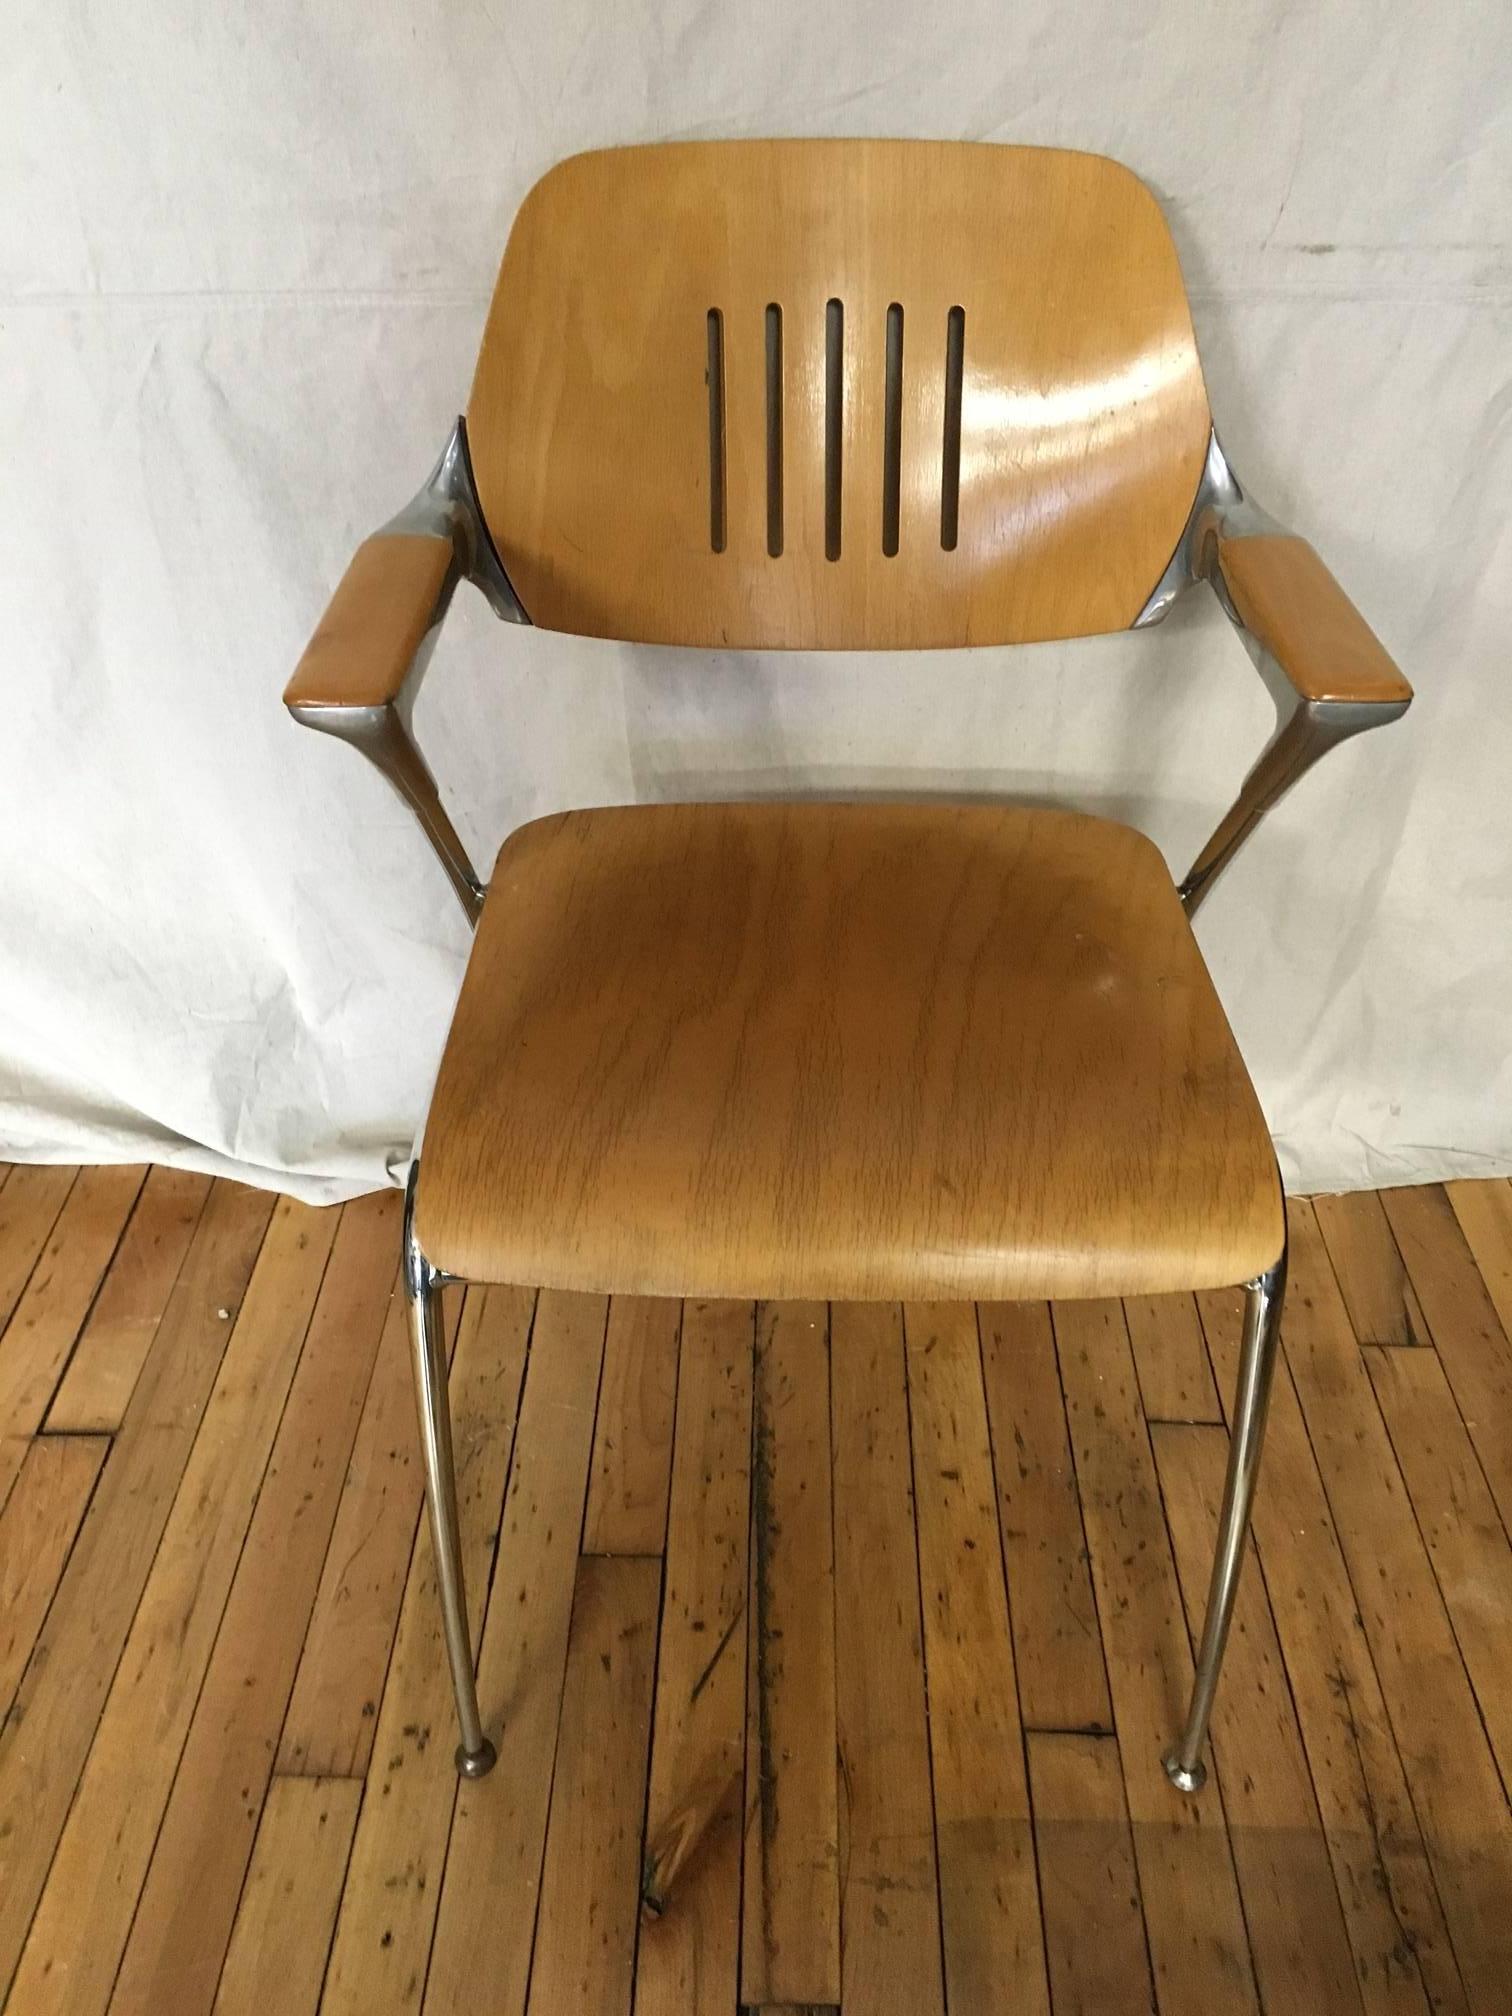 Thonet-style stacking chair is sturdily made of thick, varnished ply mounted on a steel frame. Excellent condition, extremely comfortable with curved seat, vented backrest and z-shaped wooden armrests. Stylish and substantial for every day dining or